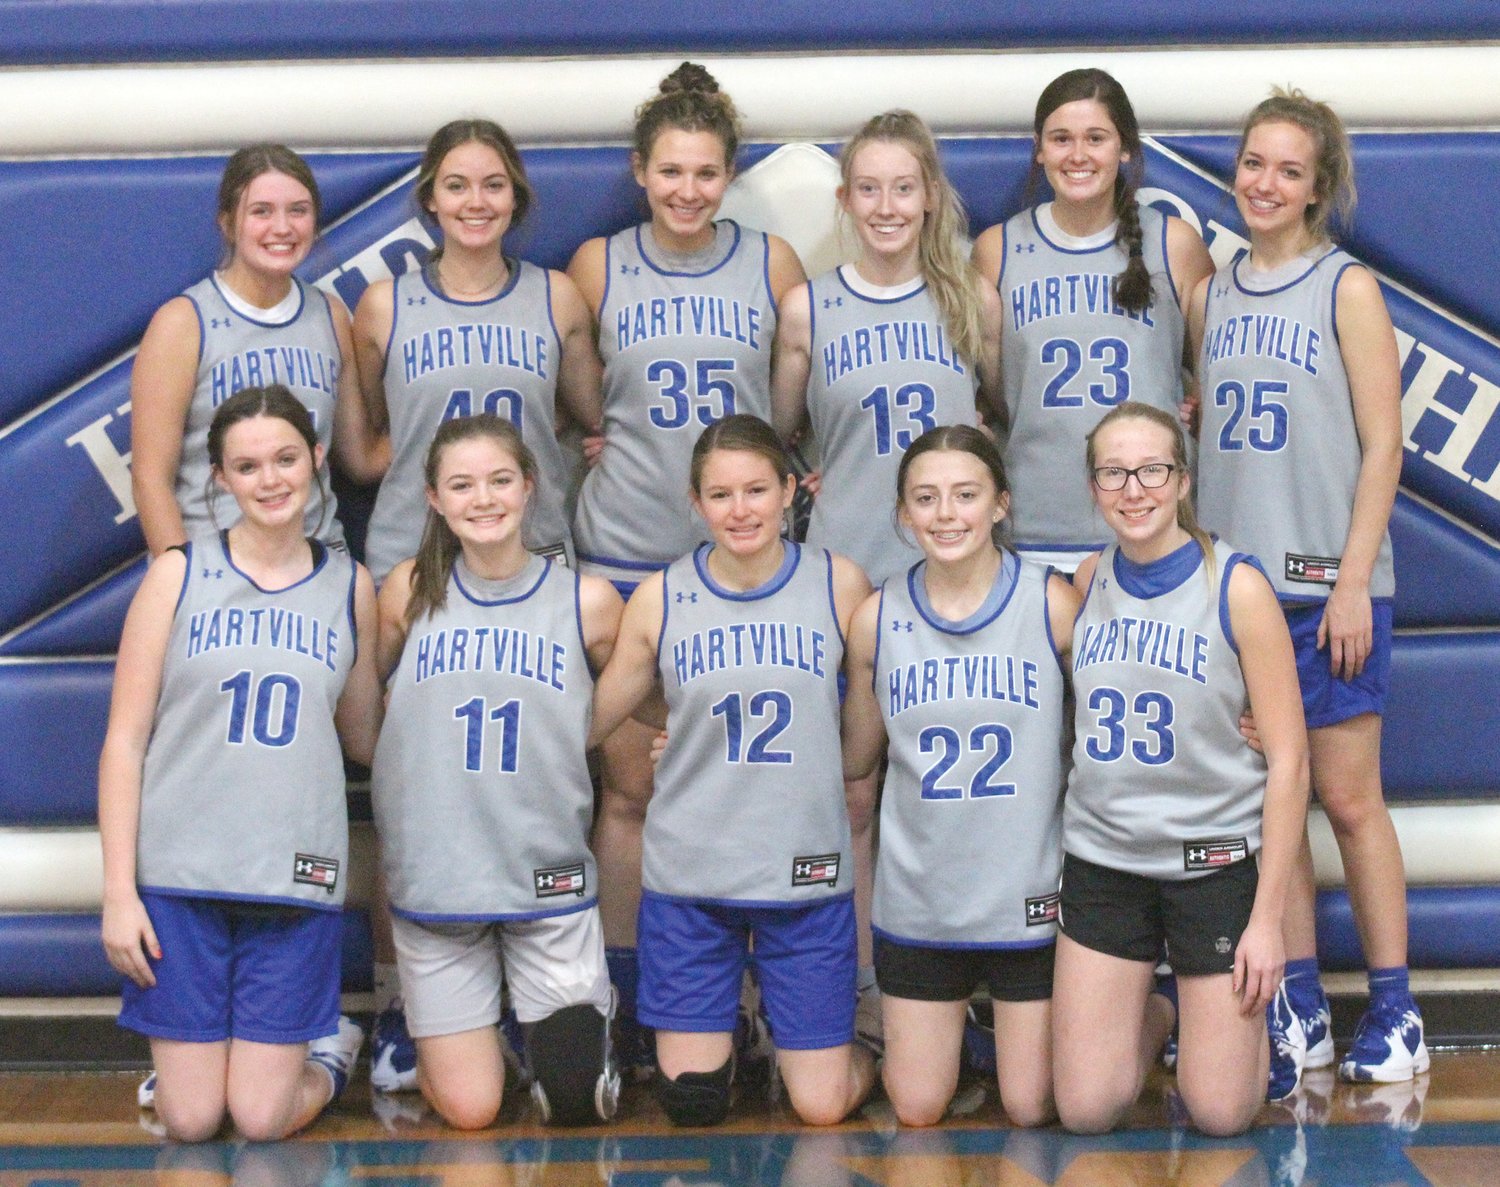 The Hartville Eagles girls basketball team has solid mix of returners and newcomers looking to make a run deep into the postseason this year.